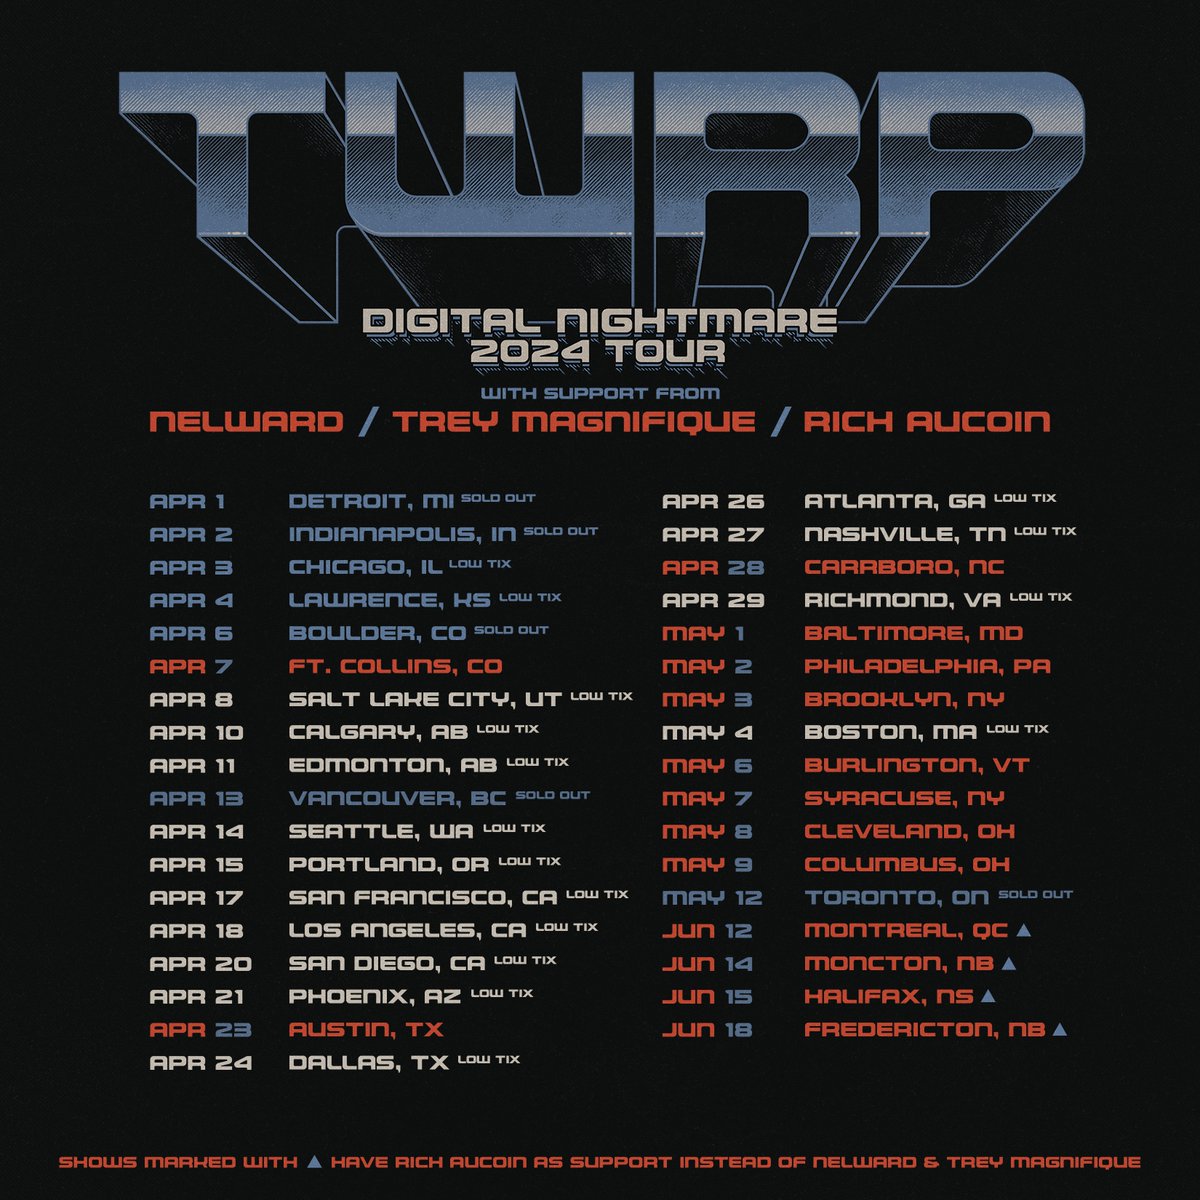 ⚡️5 SHOWS DOWN⚡️ Ft. Collins tonight! Get tickets now at tix.to/TWRP With @nelward64, @bwecht and (eventually) @richaucoin! @RealGoodTouring